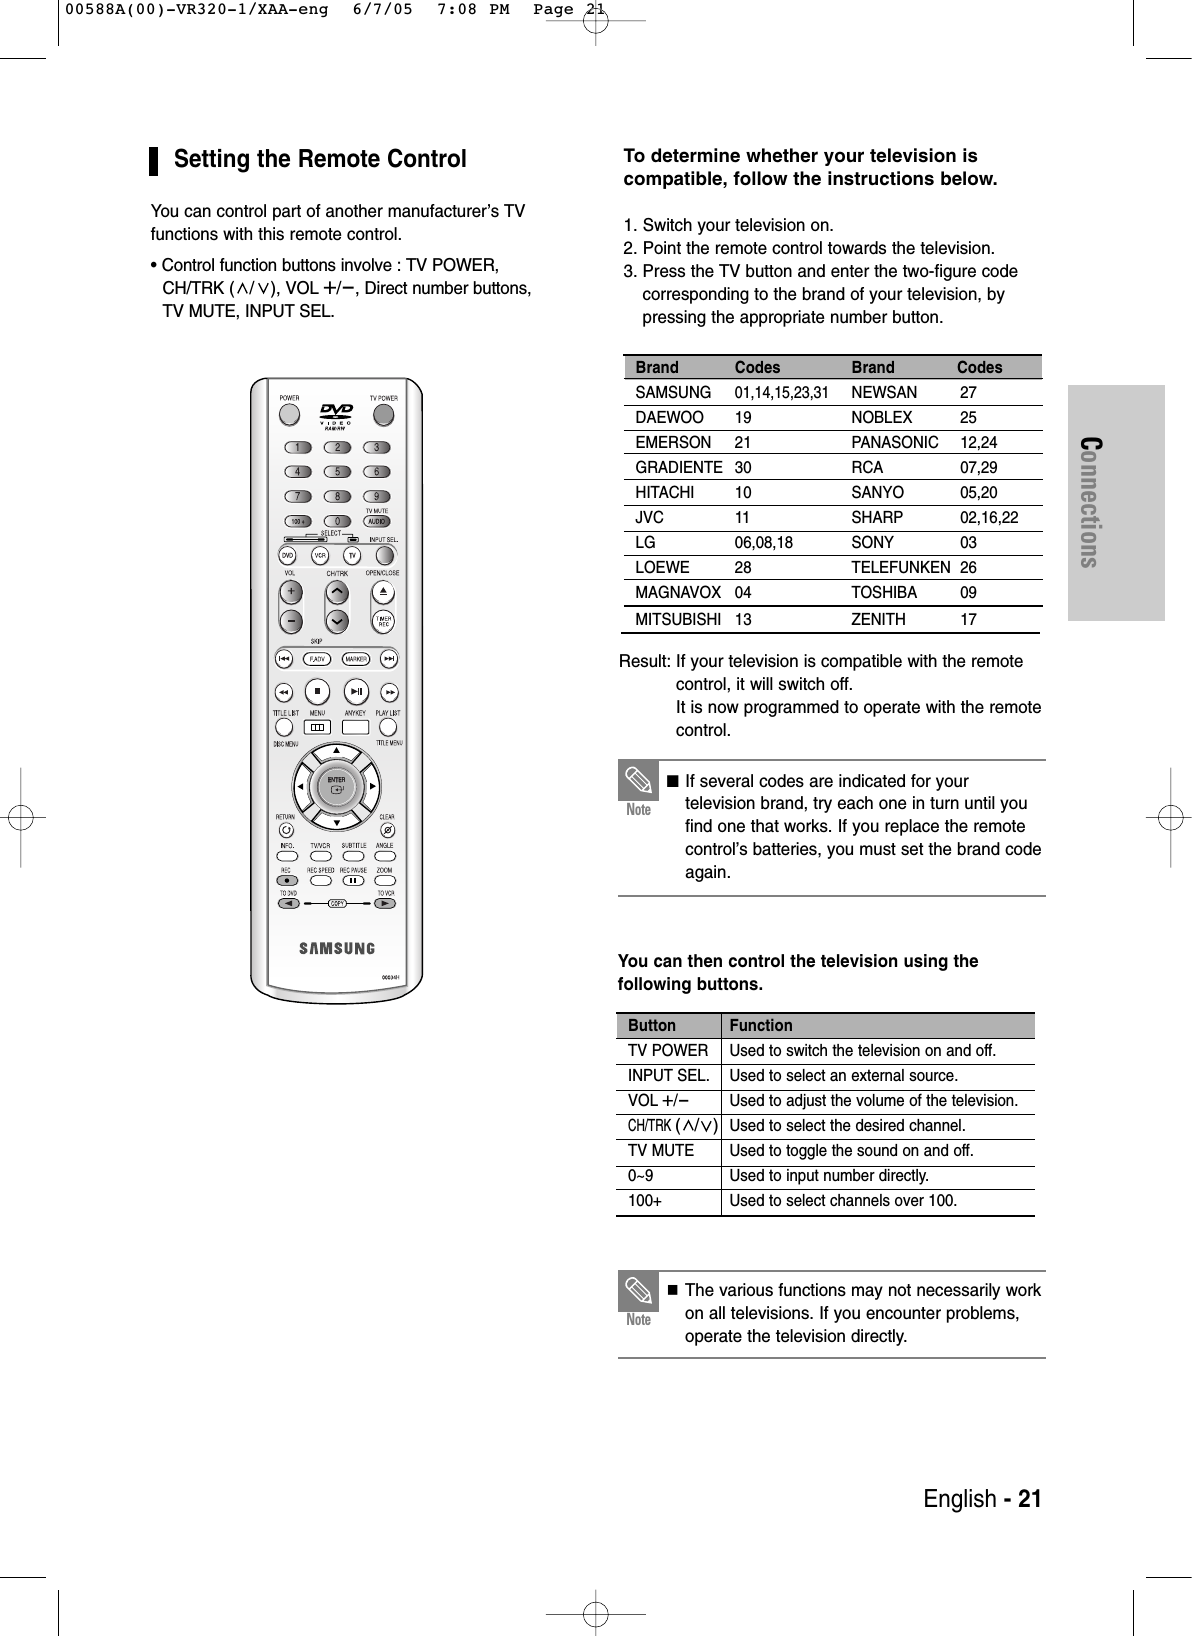 To determine whether your television is compatible, follow the instructions below.1. Switch your television on.2. Point the remote control towards the television.3. Press the TV button and enter the two-figure codecorresponding to the brand of your television, bypressing the appropriate number button.English - 21ConnectionsResult: If your television is compatible with the remotecontrol, it will switch off.It is now programmed to operate with the remotecontrol.You can then control the television using the following buttons.Brand Codes SAMSUNG01,14,15,23,31DAEWOO 19EMERSON 21GRADIENTE 30HITACHI 10JVC 11LG 06,08,18LOEWE 28MAGNAVOX 04MITSUBISHI 13Brand CodesNEWSAN 27NOBLEX 25PANASONIC 12,24RCA 07,29SANYO 05,20SHARP 02,16,22SONY 03TELEFUNKEN 26TOSHIBA 09ZENITH 17Button FunctionTV POWER Used to switch the television on and off.INPUT SEL. Used to select an external source.VOL+/-Used to adjust the volume of the television.CH/TRK (/)Used to select the desired channel.TV MUTE Used to toggle the sound on and off.0~9 Used to input number directly.100+ Used to select channels over 100.■ If several codes are indicated for your television brand, try each one in turn until youfind one that works. If you replace the remotecontrol’s batteries, you must set the brand codeagain.NoteThe various functions may not necessarily workon all televisions. If you encounter problems,operate the television directly.NoteSetting the Remote ControlYou can control part of another manufacturer’s TVfunctions with this remote control.• Control function buttons involve : TV POWER, CH/TRK ( / ), VOL+/-, Direct number buttons,TV MUTE, INPUT SEL.00588A(00)-VR320-1/XAA-eng  6/7/05  7:08 PM  Page 21